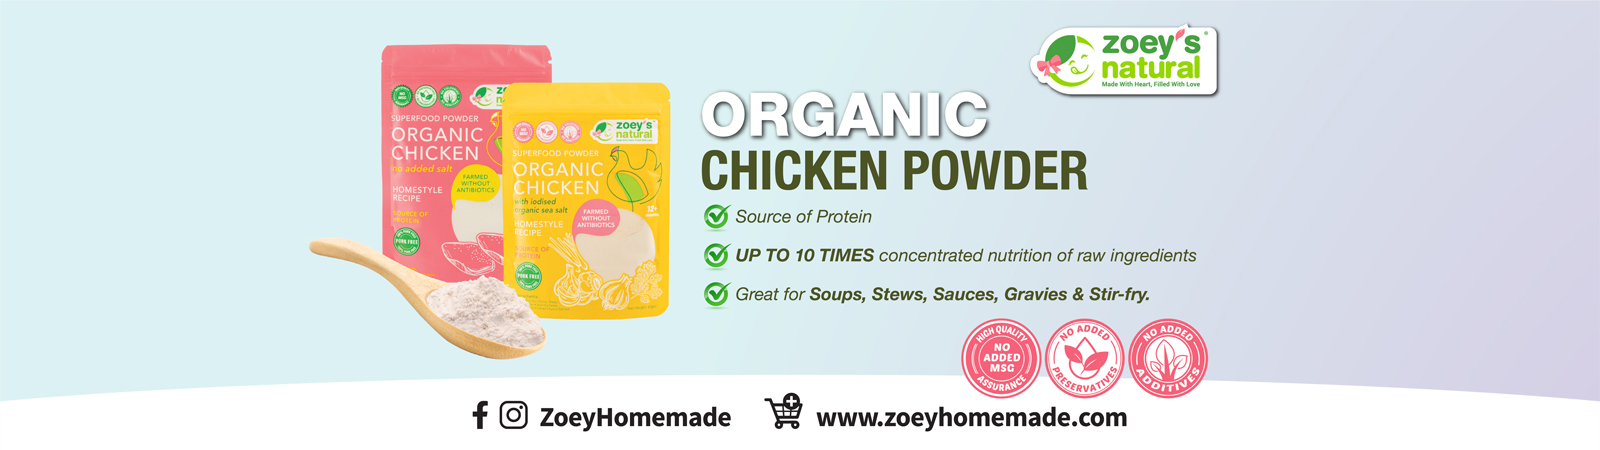 Zoey’s Natural Superfood Powder